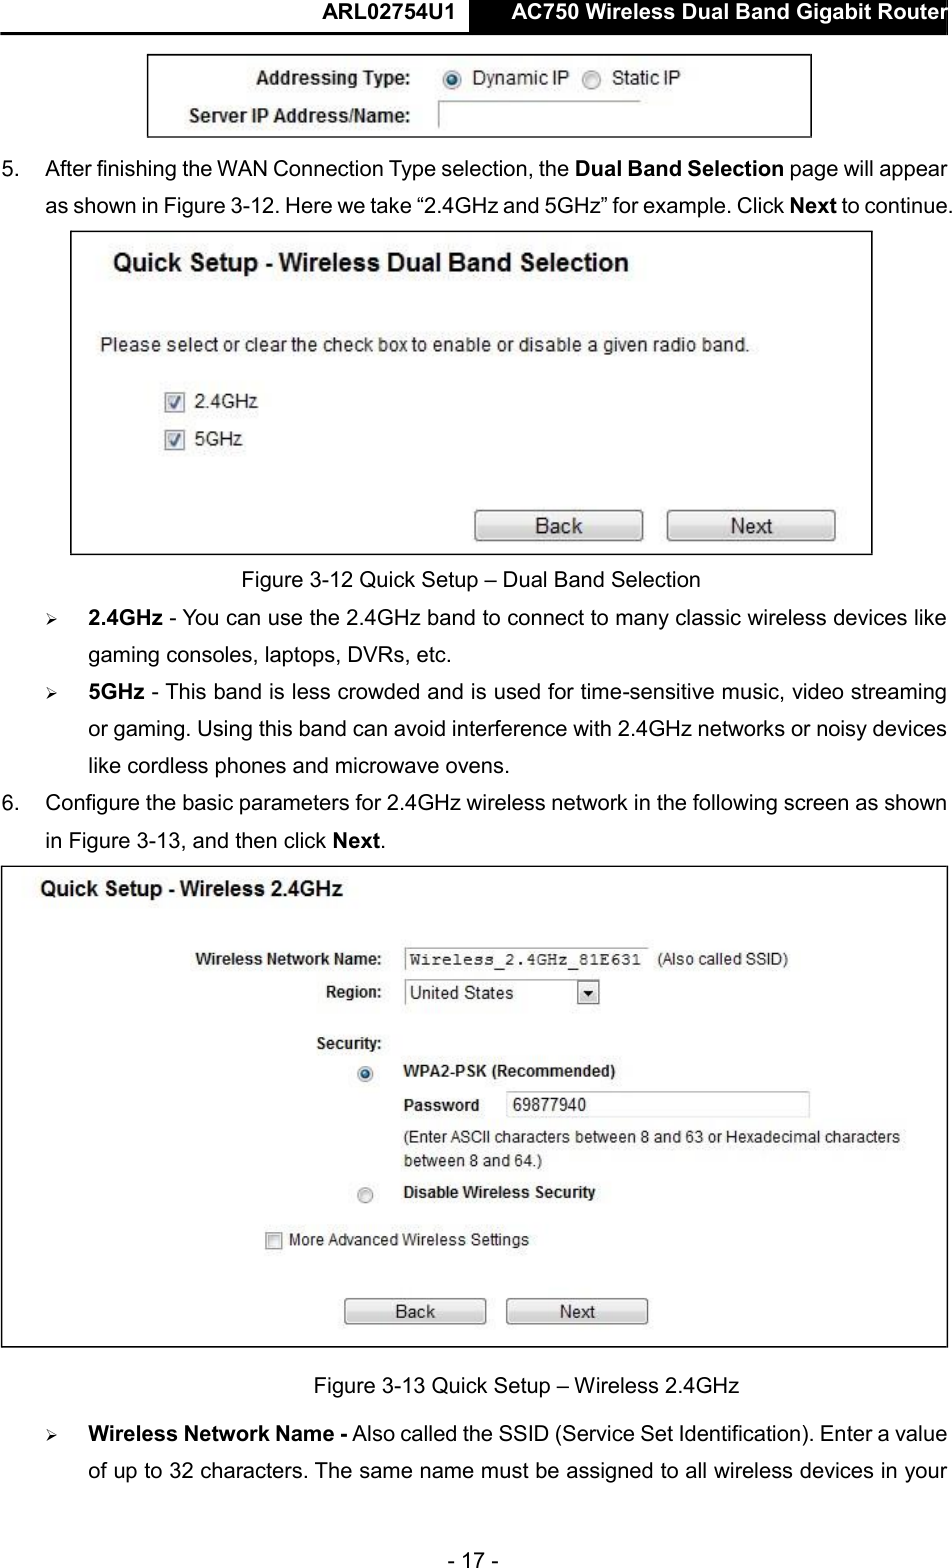  ARL02754U1  AC750 Wireless Dual Band Gigabit Router    - 17 -    5. After finishing the WAN Connection Type selection, the Dual Band Selection page will appear as shown in Figure 3-12. Here we take “2.4GHz and 5GHz” for example. Click Next to continue.   Figure 3-12 Quick Setup – Dual Band Selection   2.4GHz - You can use the 2.4GHz band to connect to many classic wireless devices like gaming consoles, laptops, DVRs, etc.   5GHz - This band is less crowded and is used for time-sensitive music, video streaming or gaming. Using this band can avoid interference with 2.4GHz networks or noisy devices like cordless phones and microwave ovens.   6. Configure the basic parameters for 2.4GHz wireless network in the following screen as shown in Figure 3-13, and then click Next.   Figure 3-13 Quick Setup – Wireless 2.4GHz   Wireless Network Name - Also called the SSID (Service Set Identification). Enter a value of up to 32 characters. The same name must be assigned to all wireless devices in your     